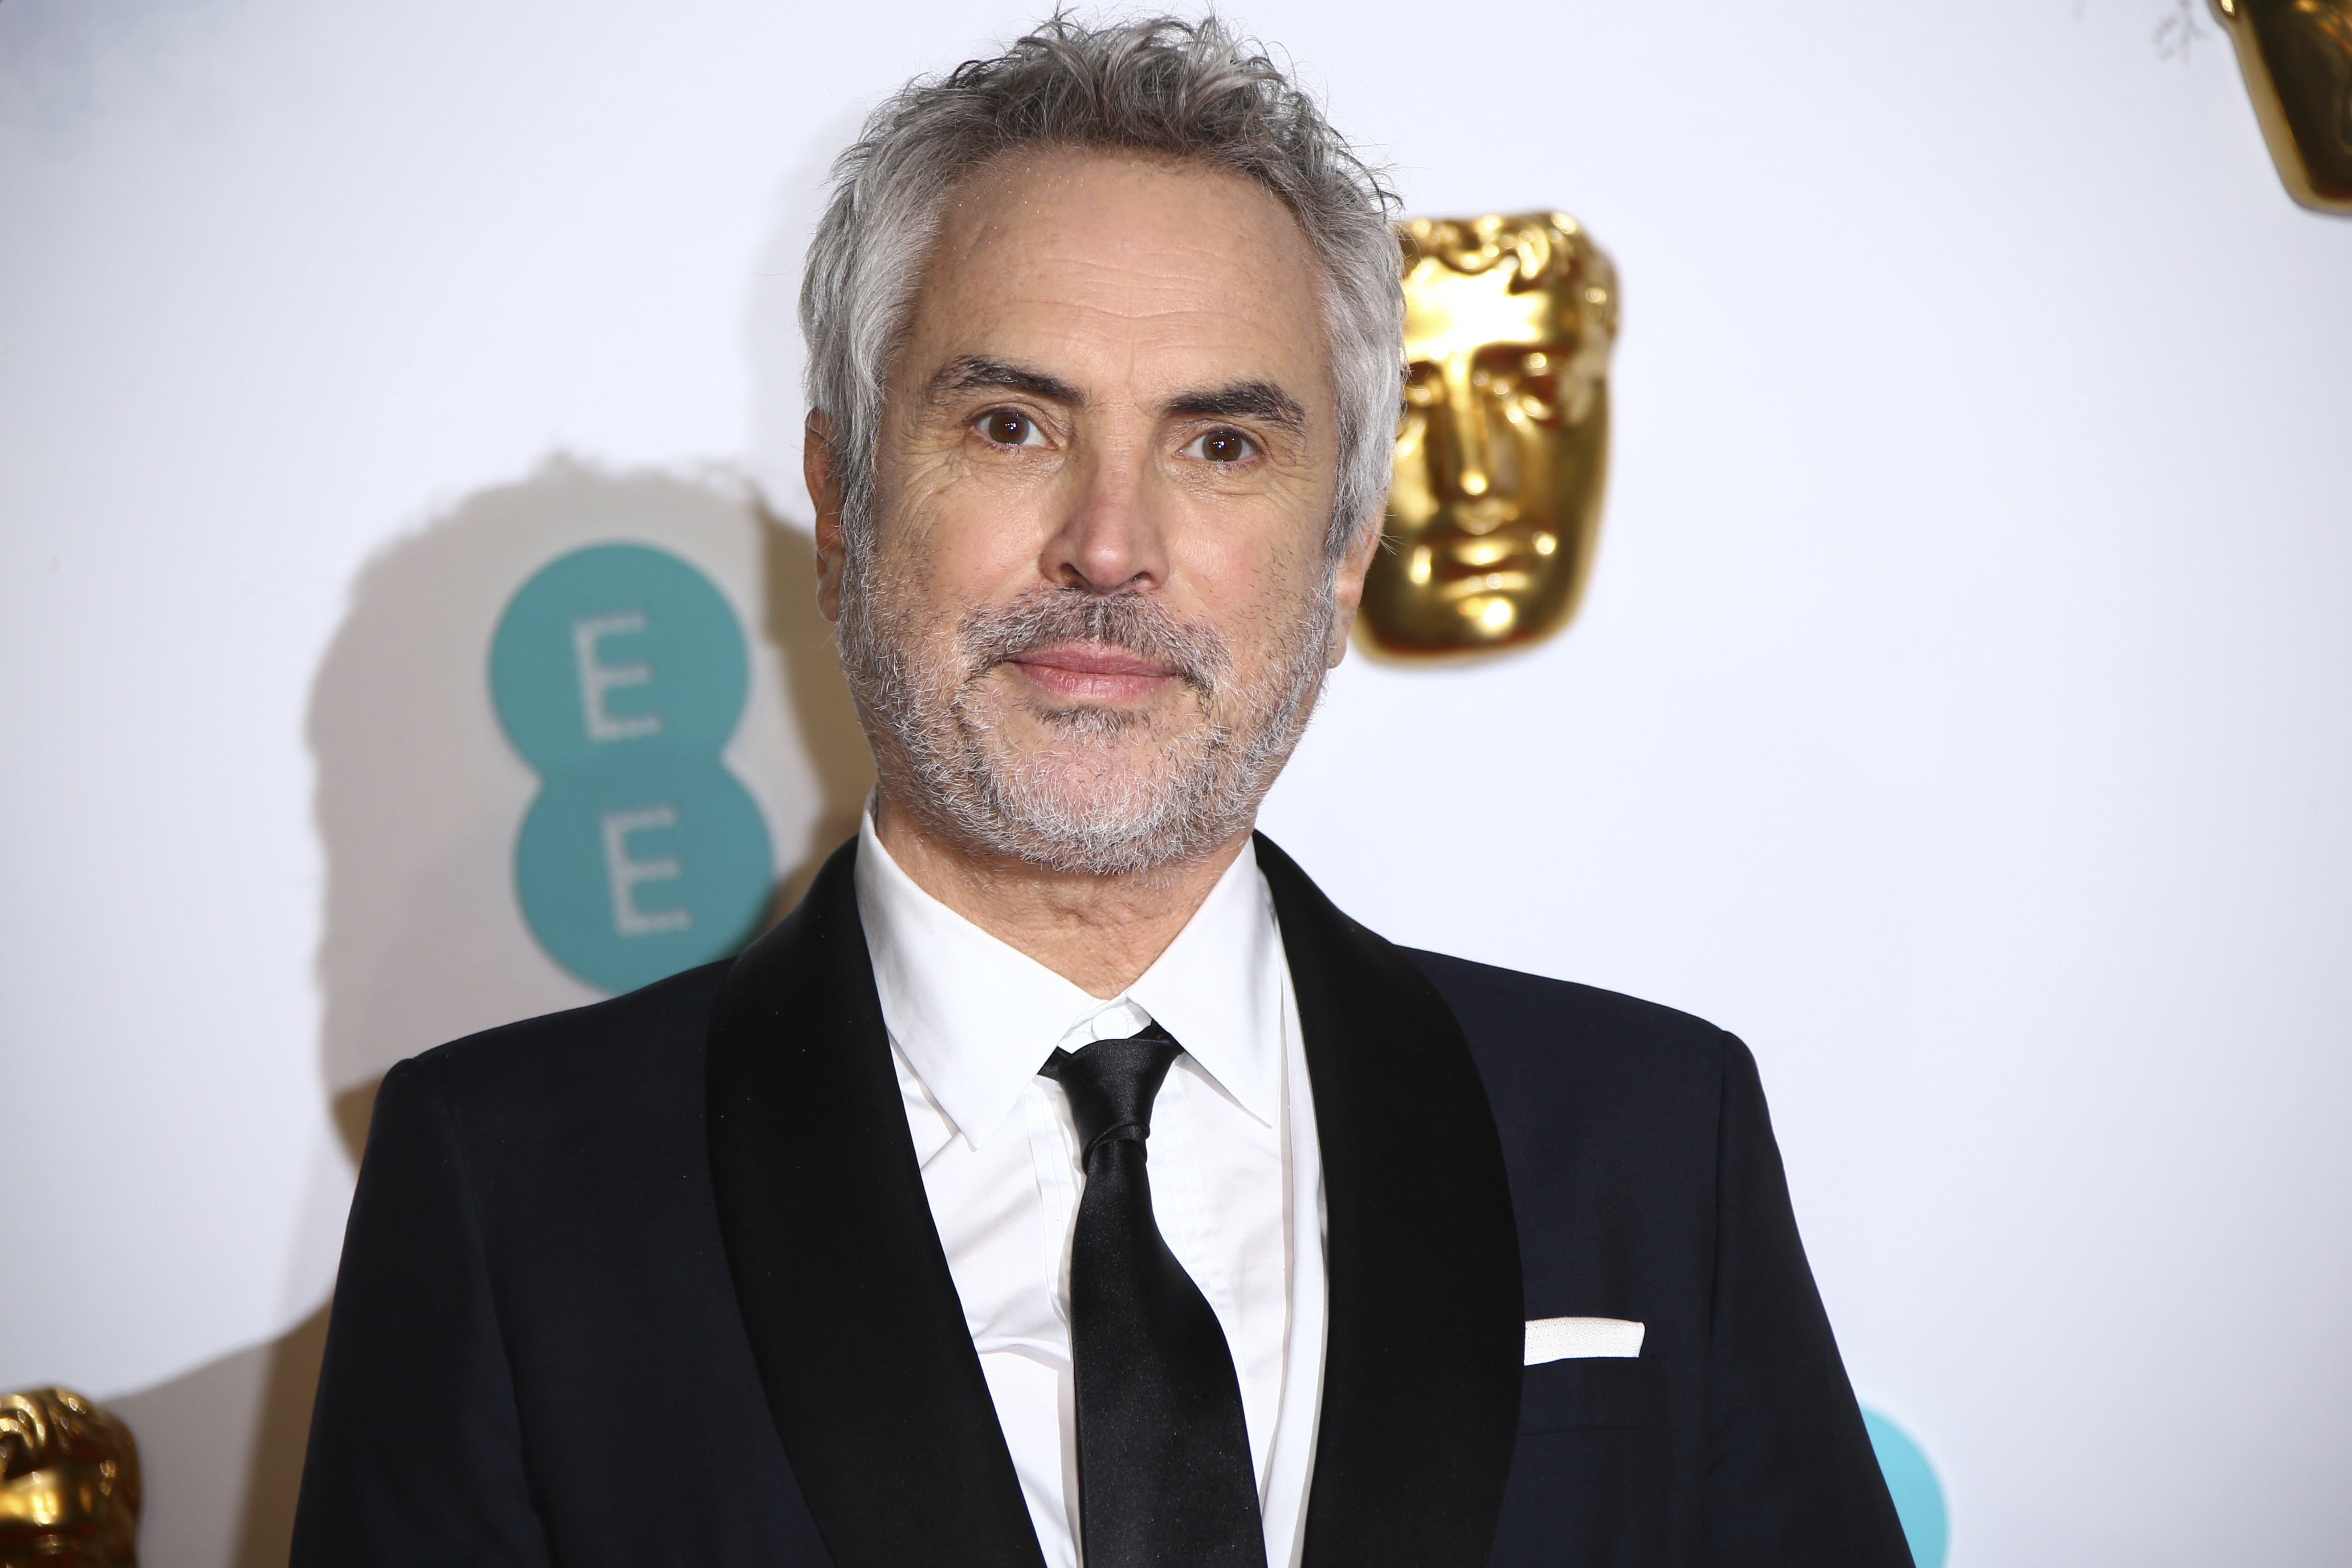 Director Alfonso Cuaron at the Baftas in London. He thanked Roma's backer, Netflix, for having the courage to support 